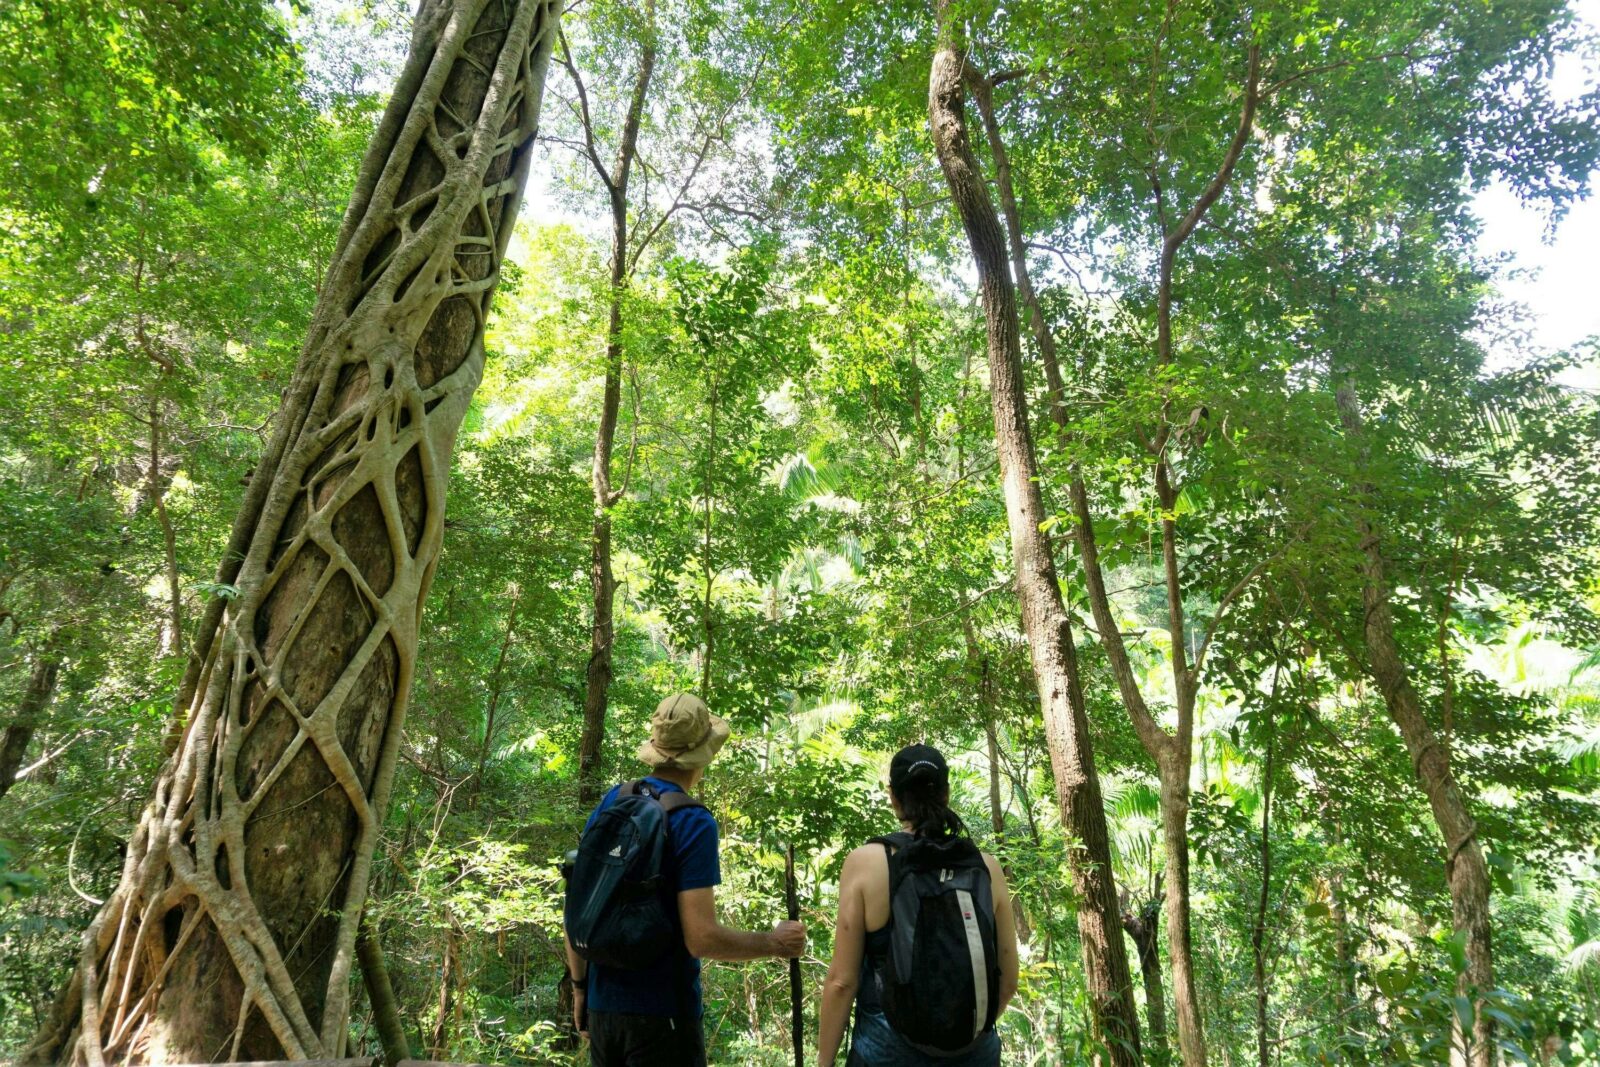 Hikers in the rainforest